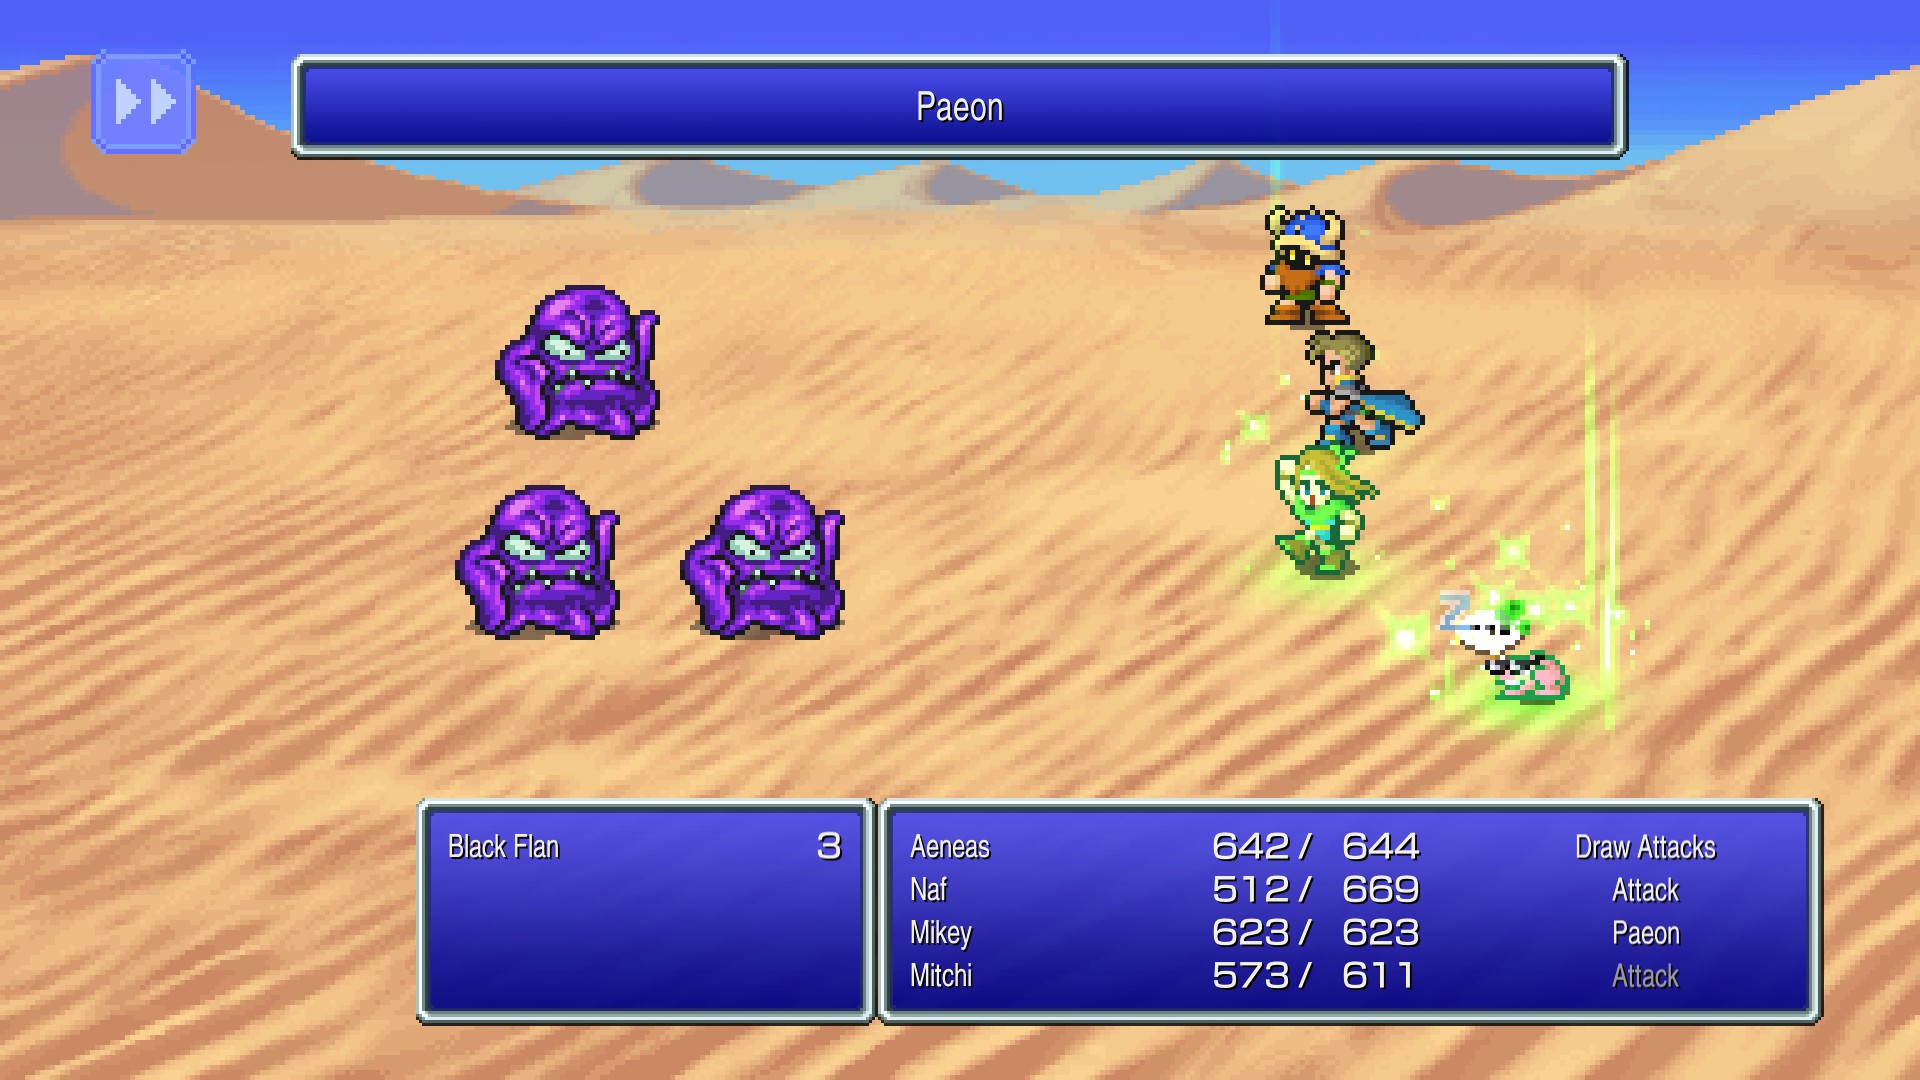 Screenshot from FF3 Pixel Remaster. A battle taking place on a desert background. The party is fighting 3 black flan monsters. The bard in the party is casting Paeon.